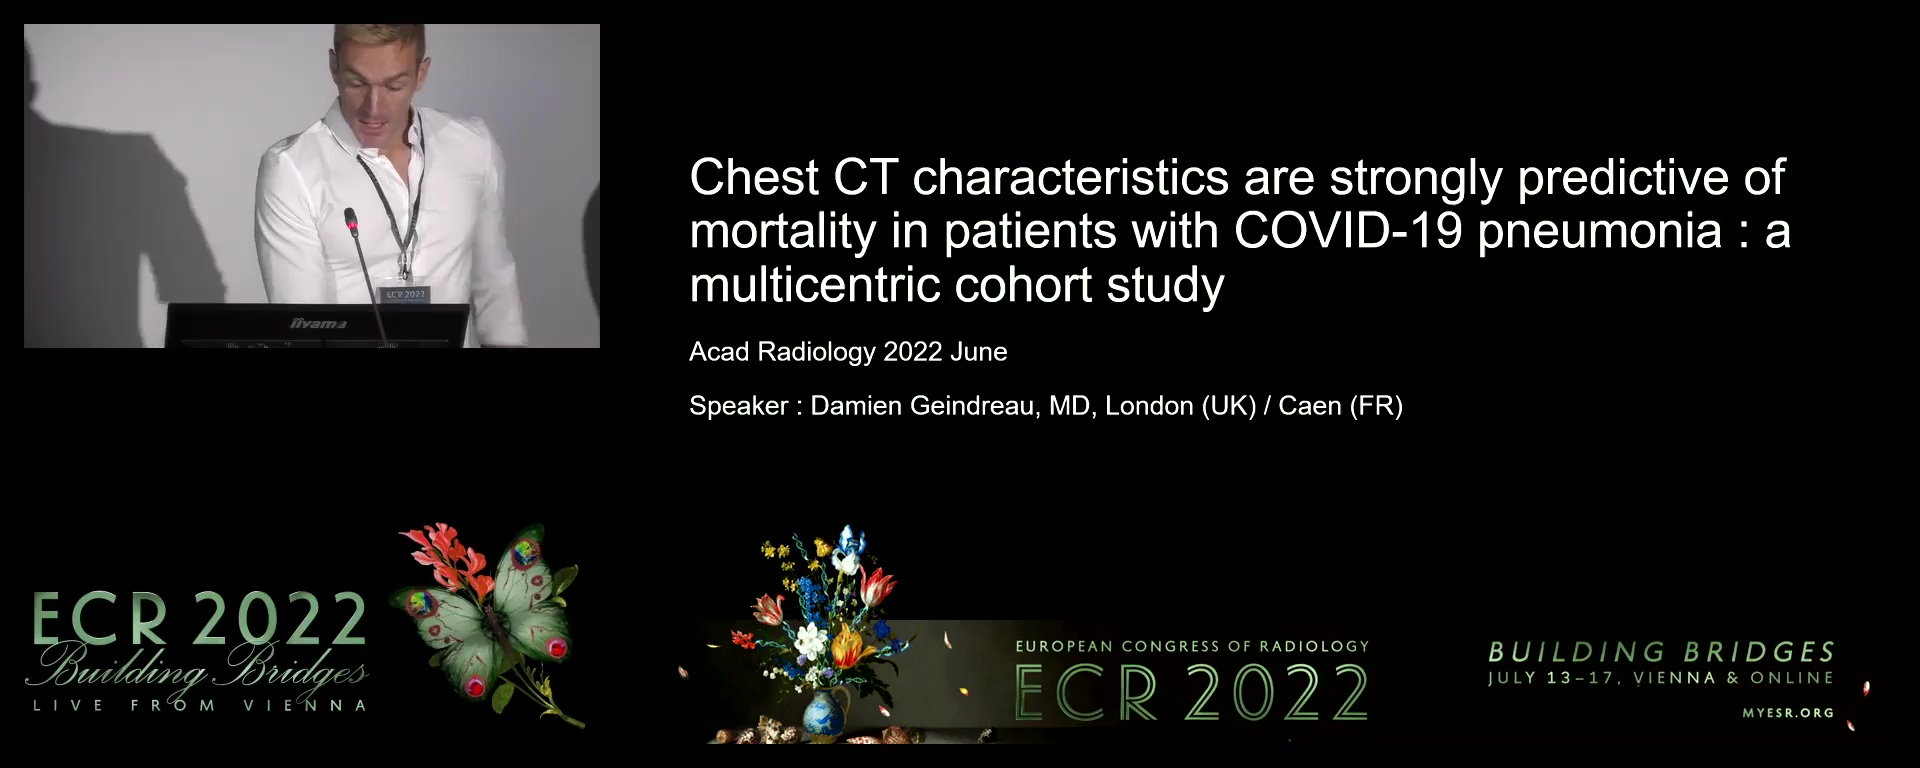 Chest CT characteristics are strongly predictive of mortality in patients with COVID-19 pneumonia: a multicentric cohort study - Damien Geindreau, London / UK